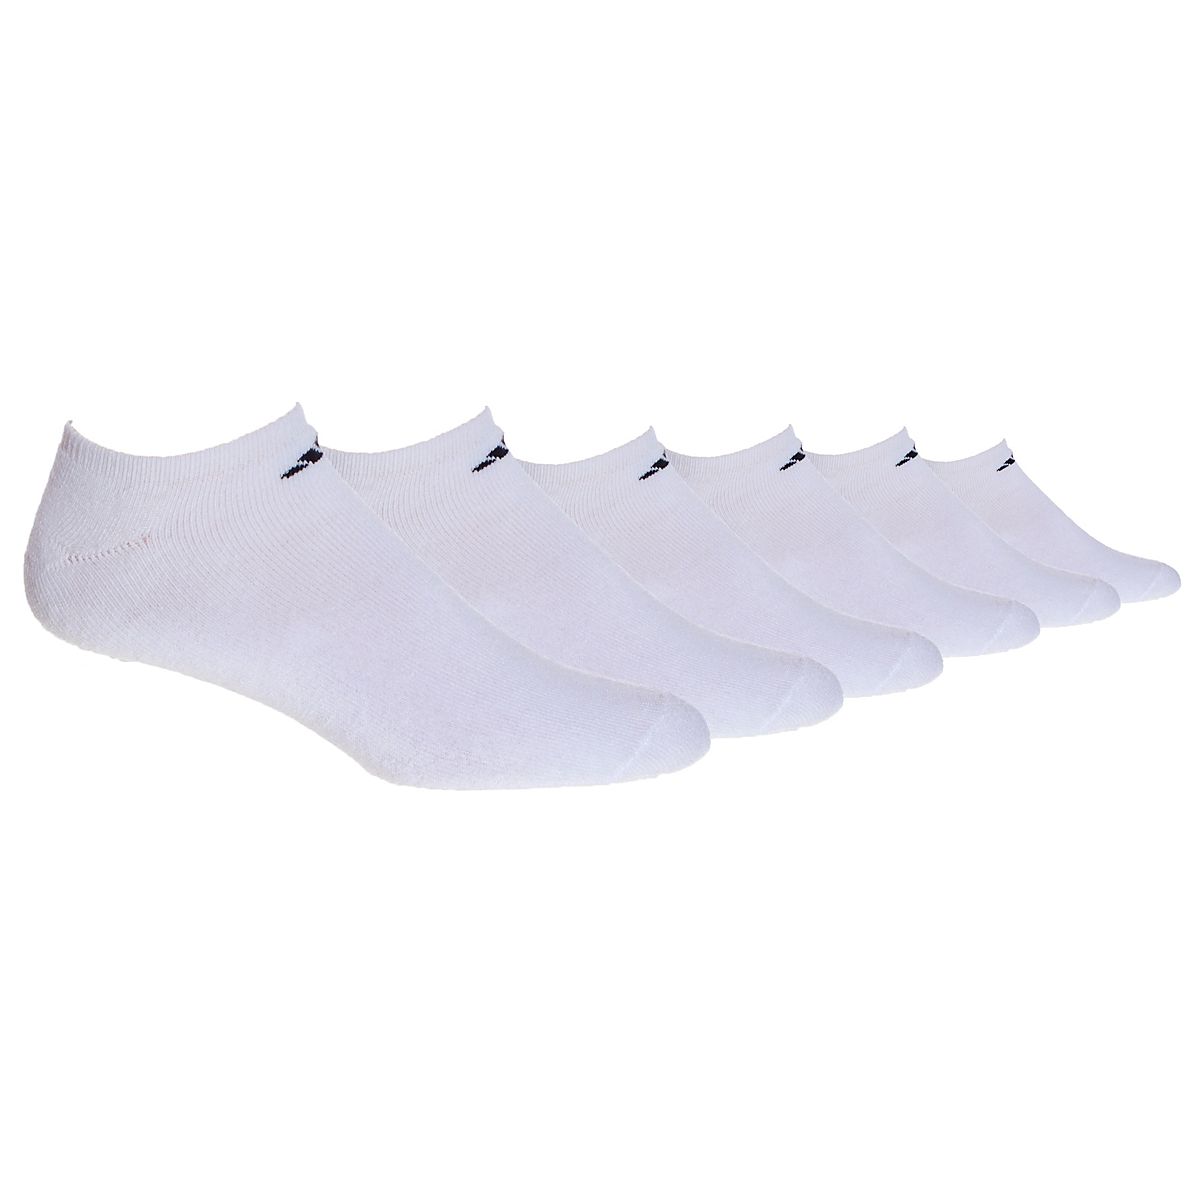 adidas Men's Athletic No-Show Socks 6 Pack | Academy